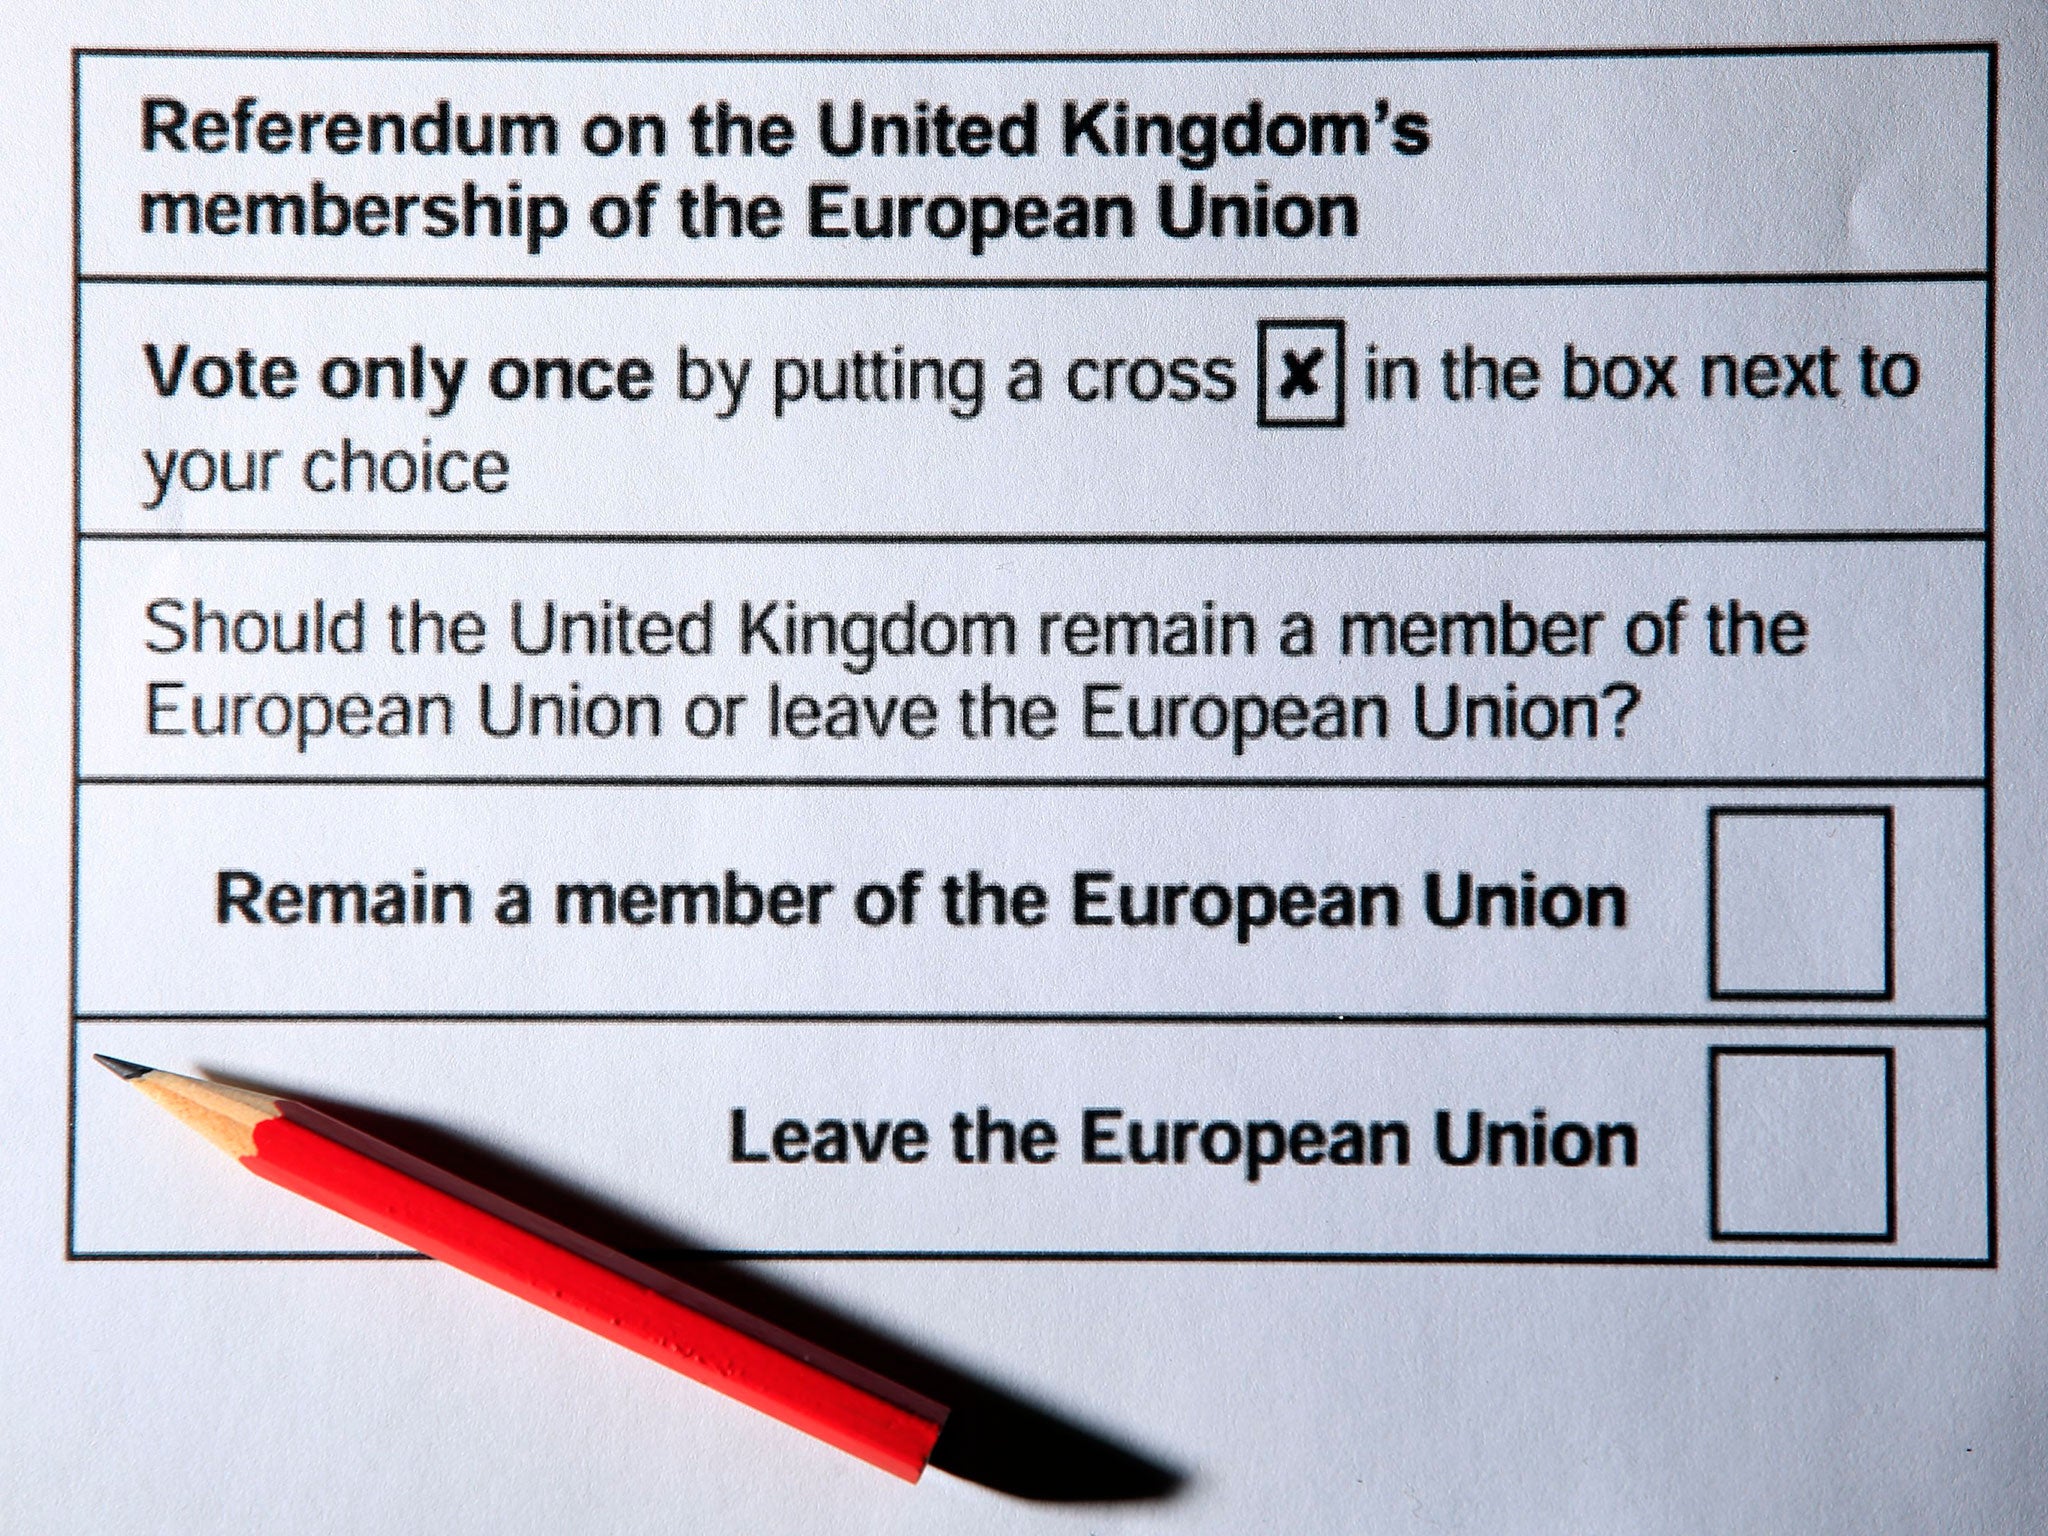 The EU referendum is due on 23 June